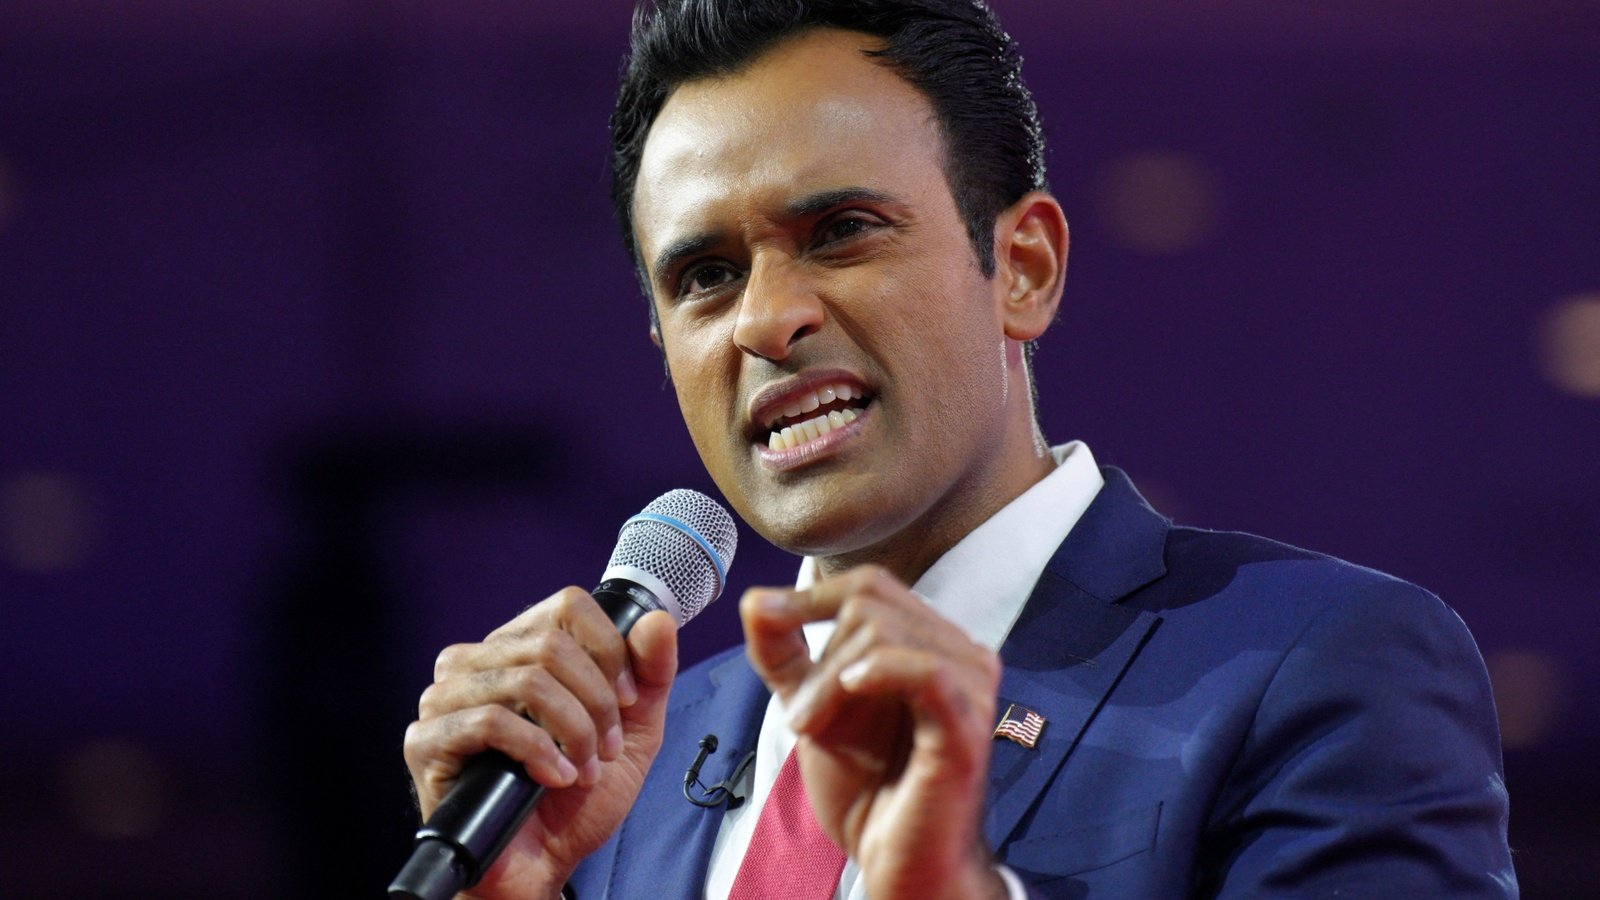 Meet Vivek Ramaswamy, Republican Presidential Candidate Council on